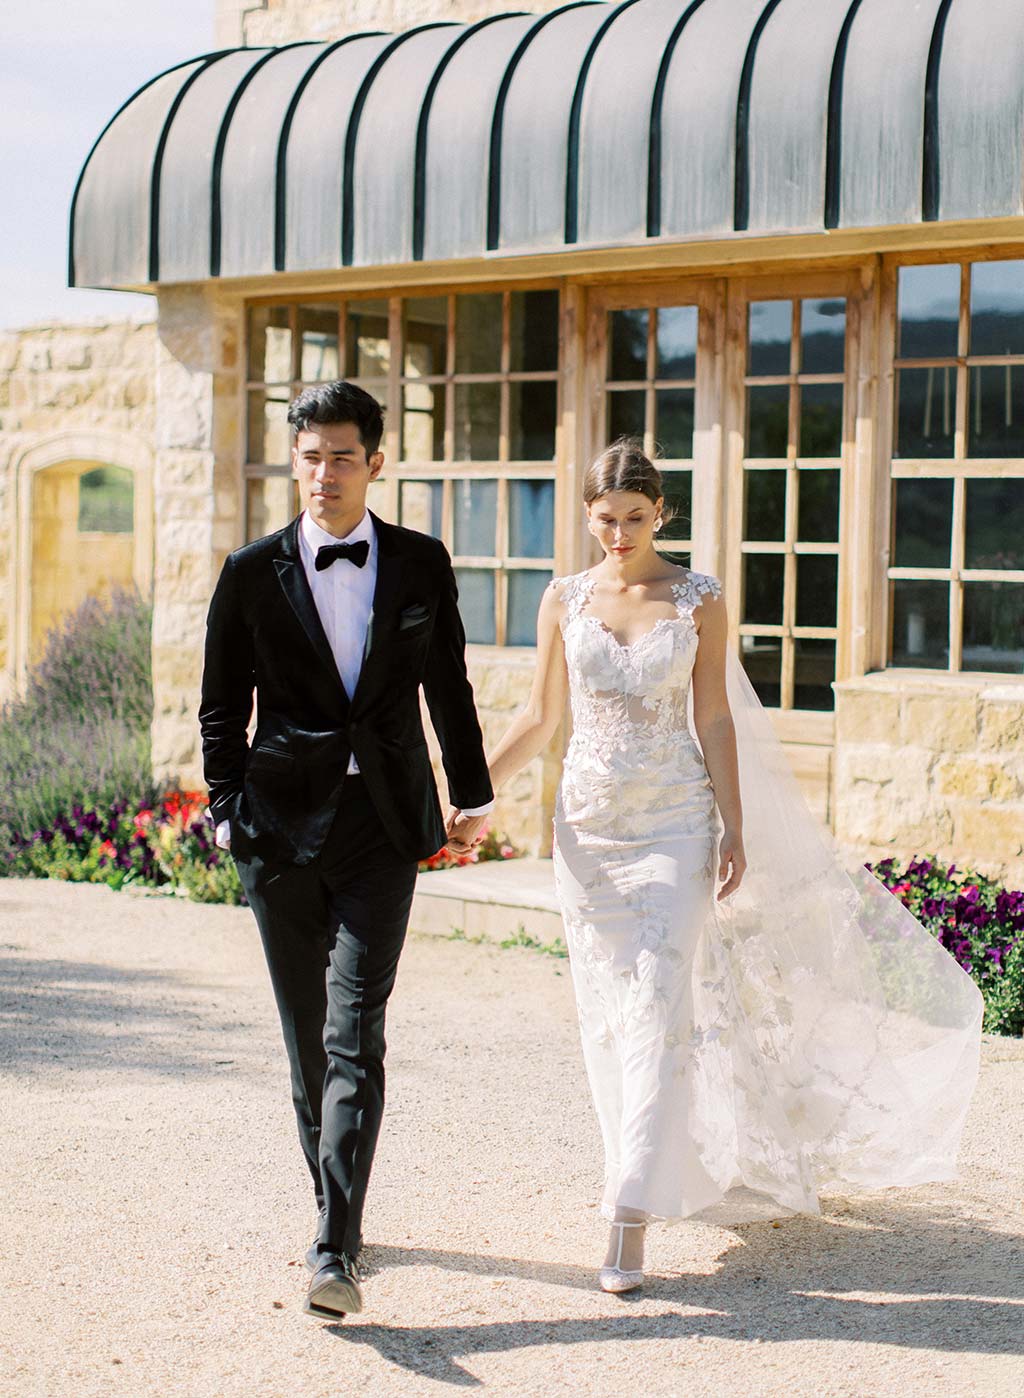 Wedding Couple Bride and Groom in Black Tuxedo and Lace Wedding Dress